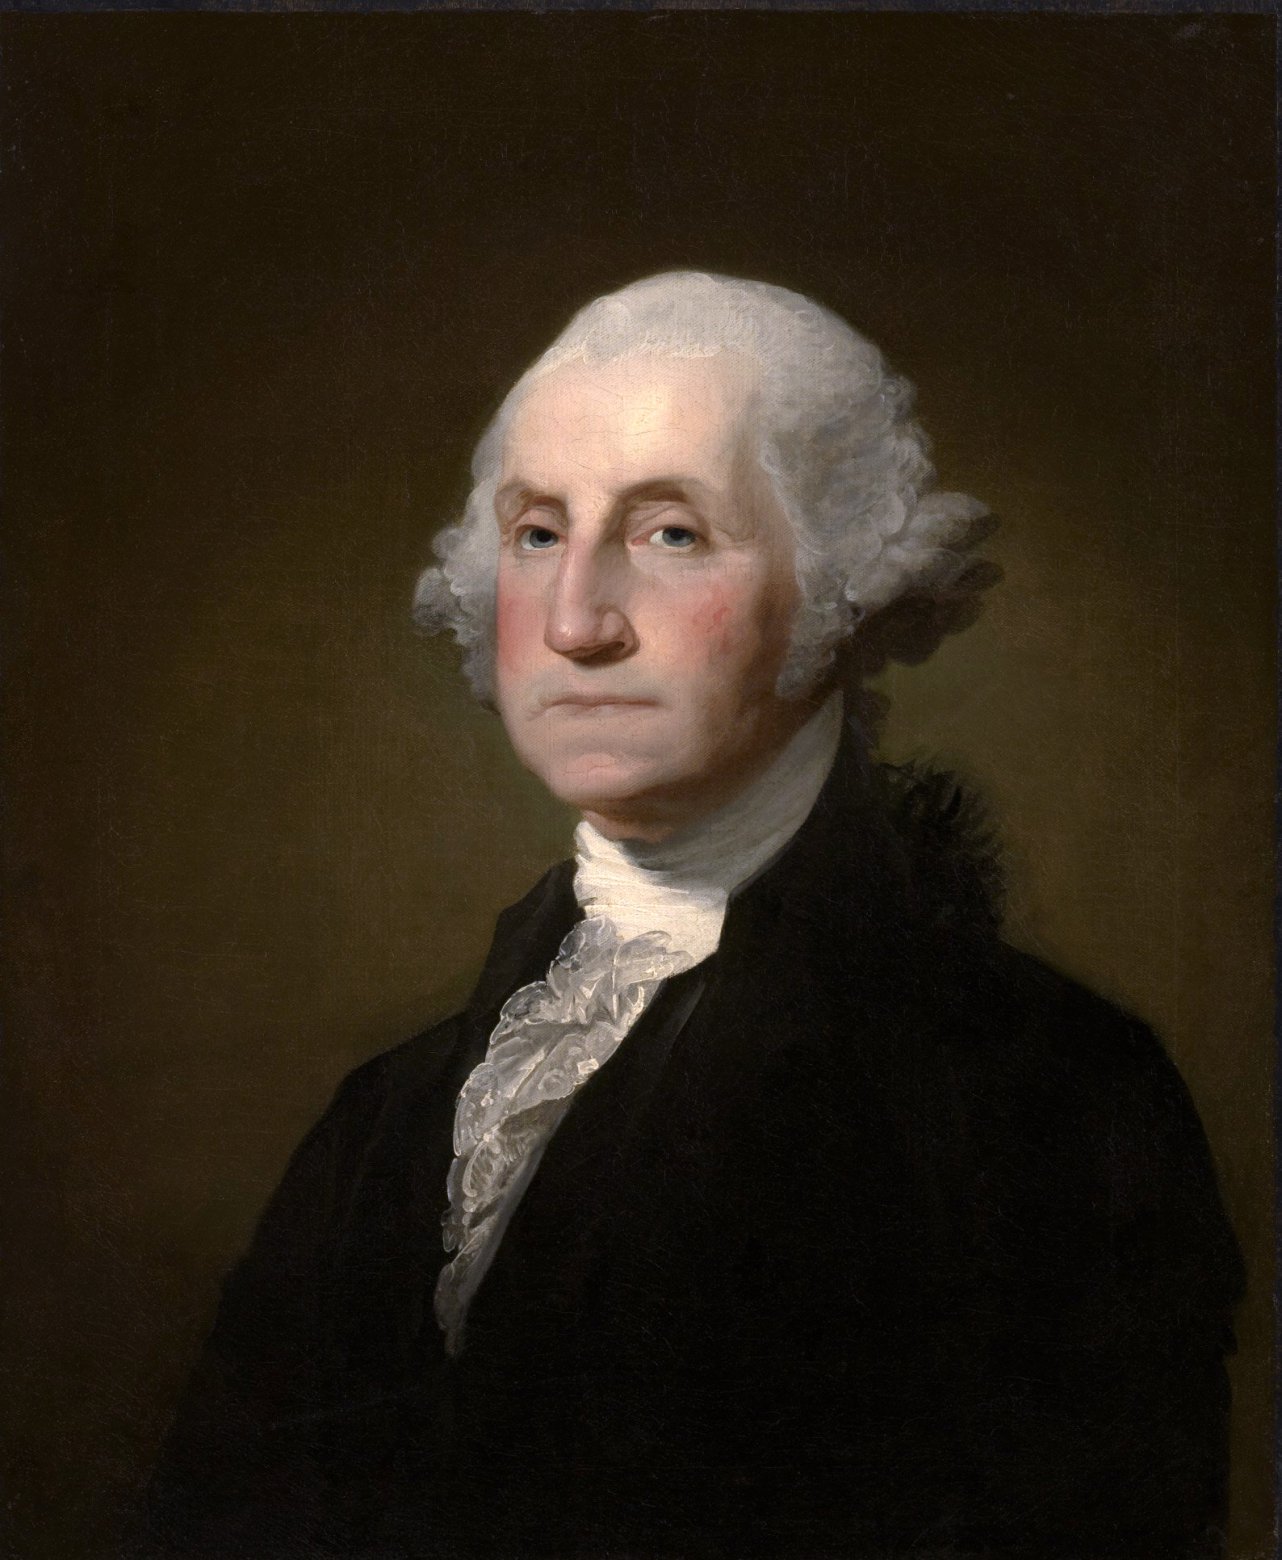 George Washington used to grow pot. Many people suspect he smoked weed to alleviate the pain caused by 18th century dentures!